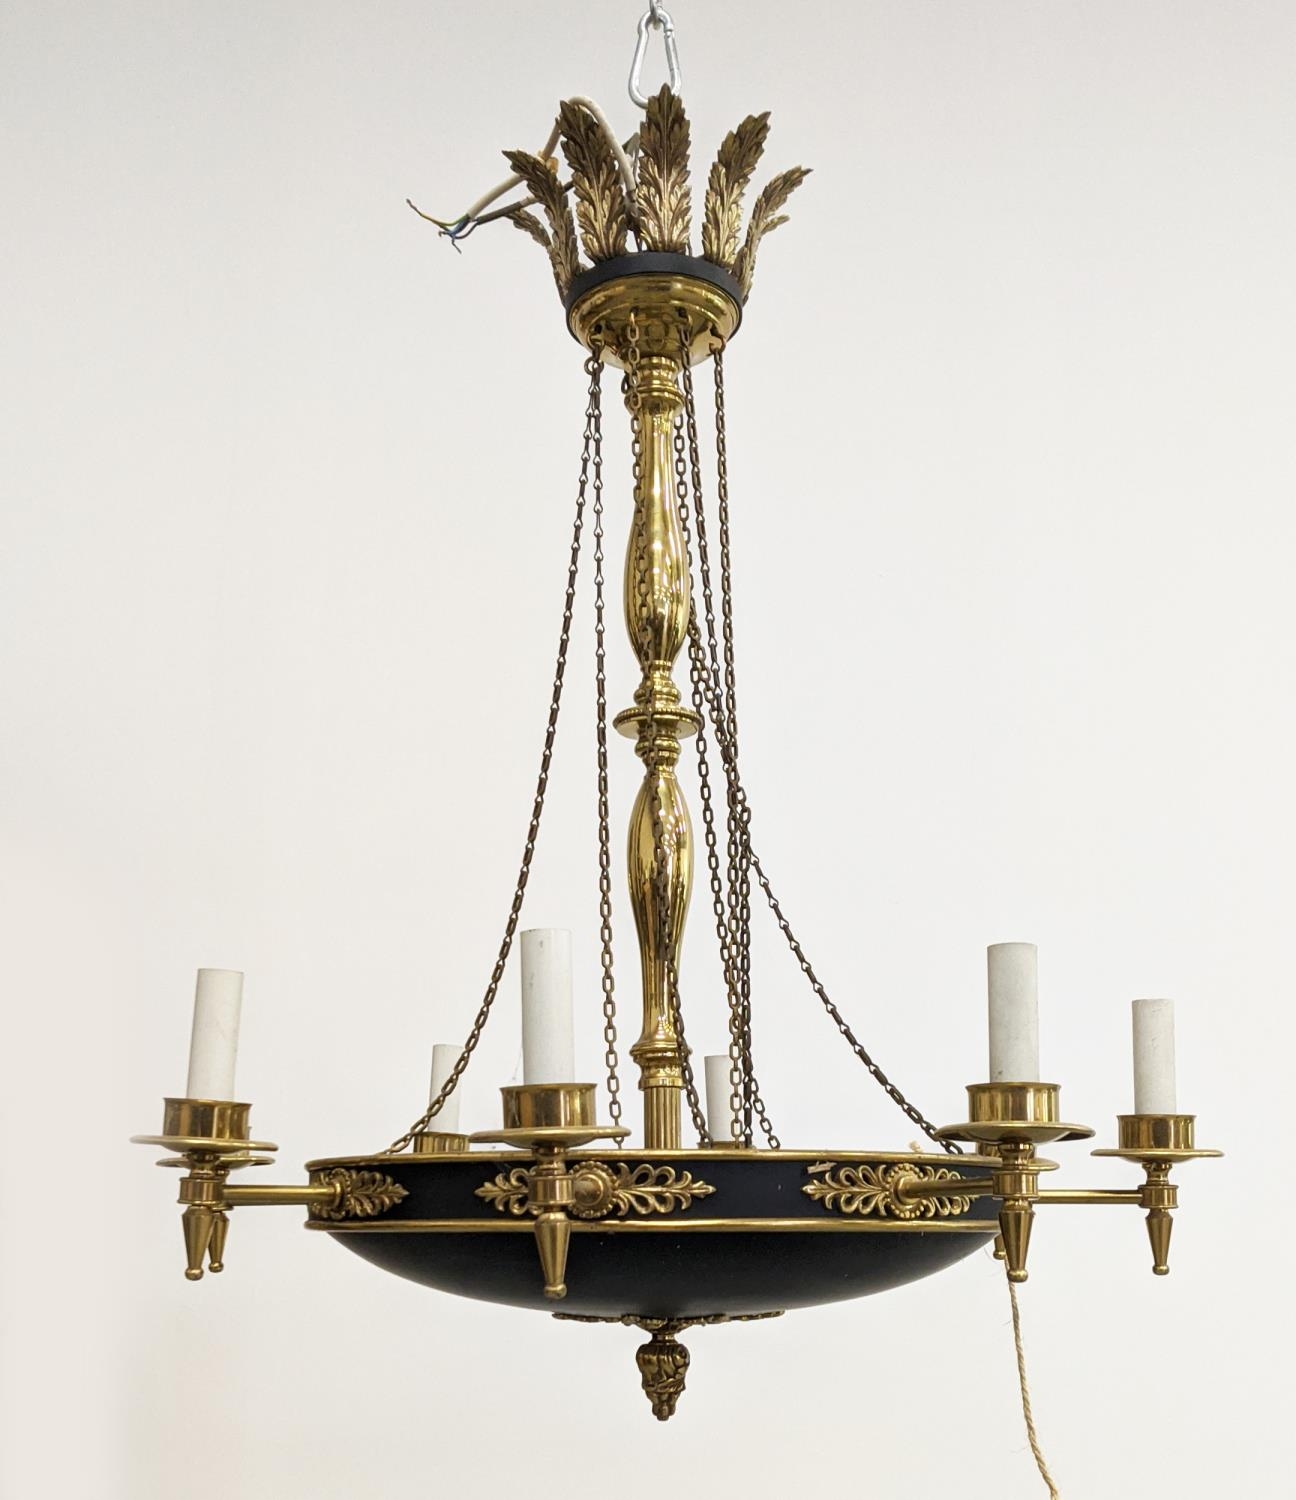 CEILING LIGHT EMPIRE STYLE, black metal and brass with acanthus leaf detail, 77cm W x 96cm H approx. - Bild 3 aus 14